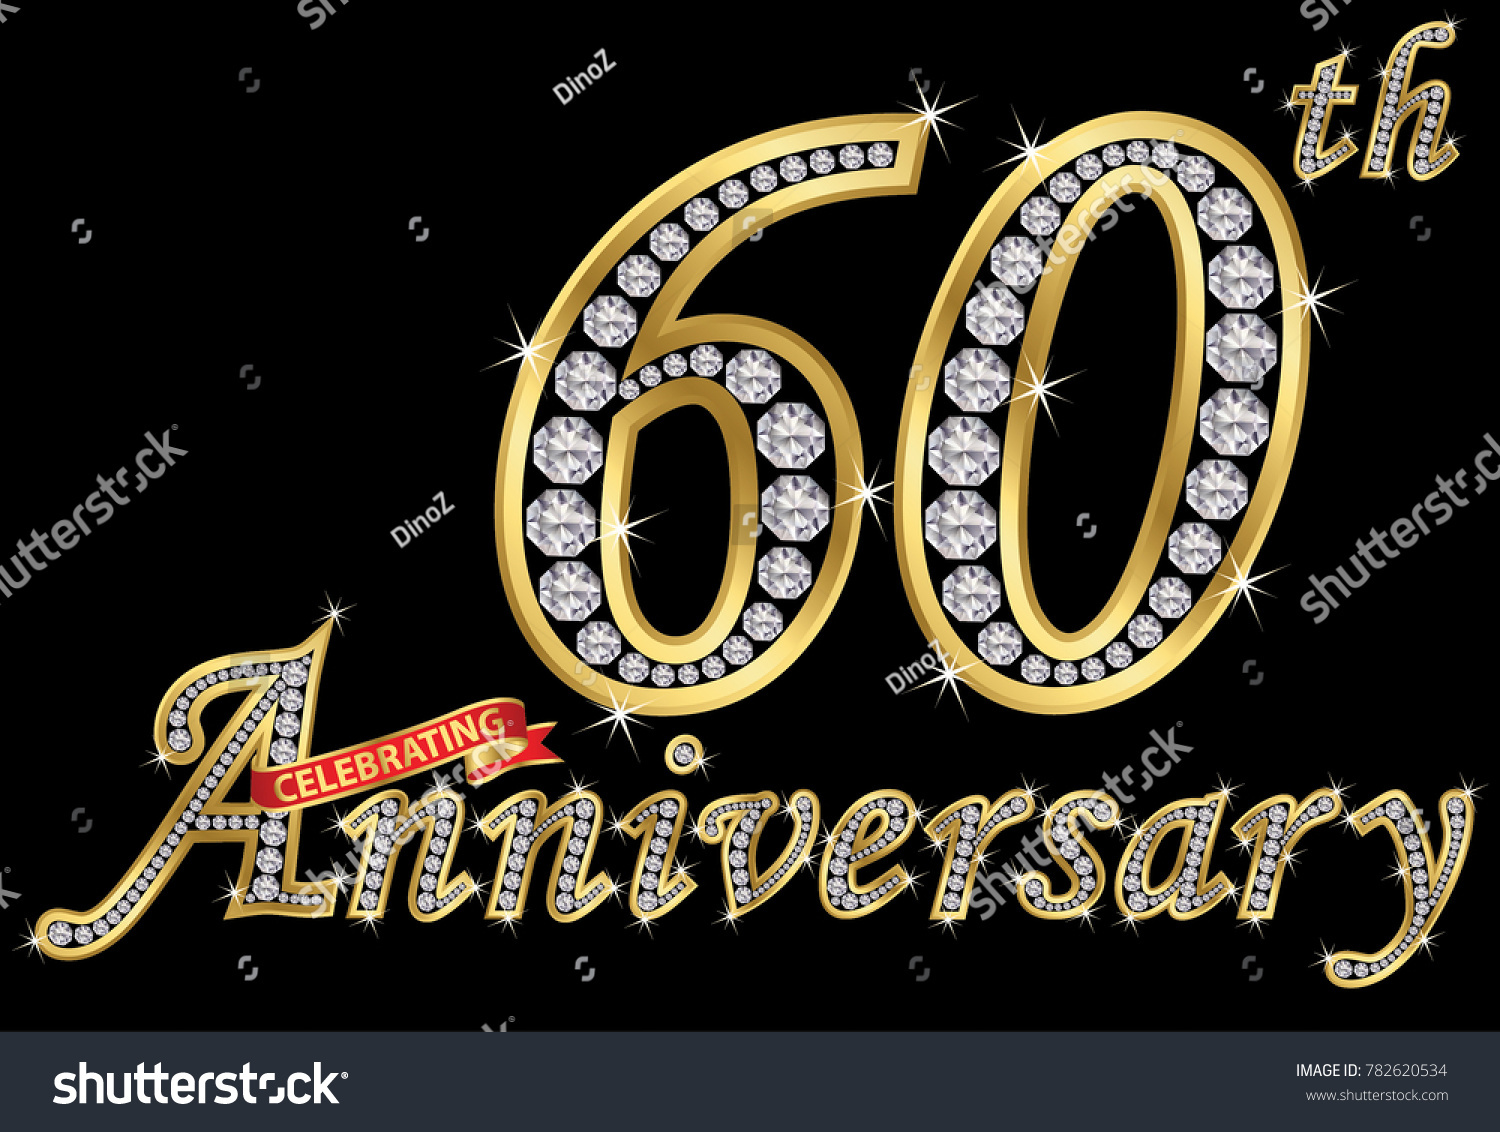 SVG of Celebrating 60th anniversary golden sign with diamonds, vector illustration svg